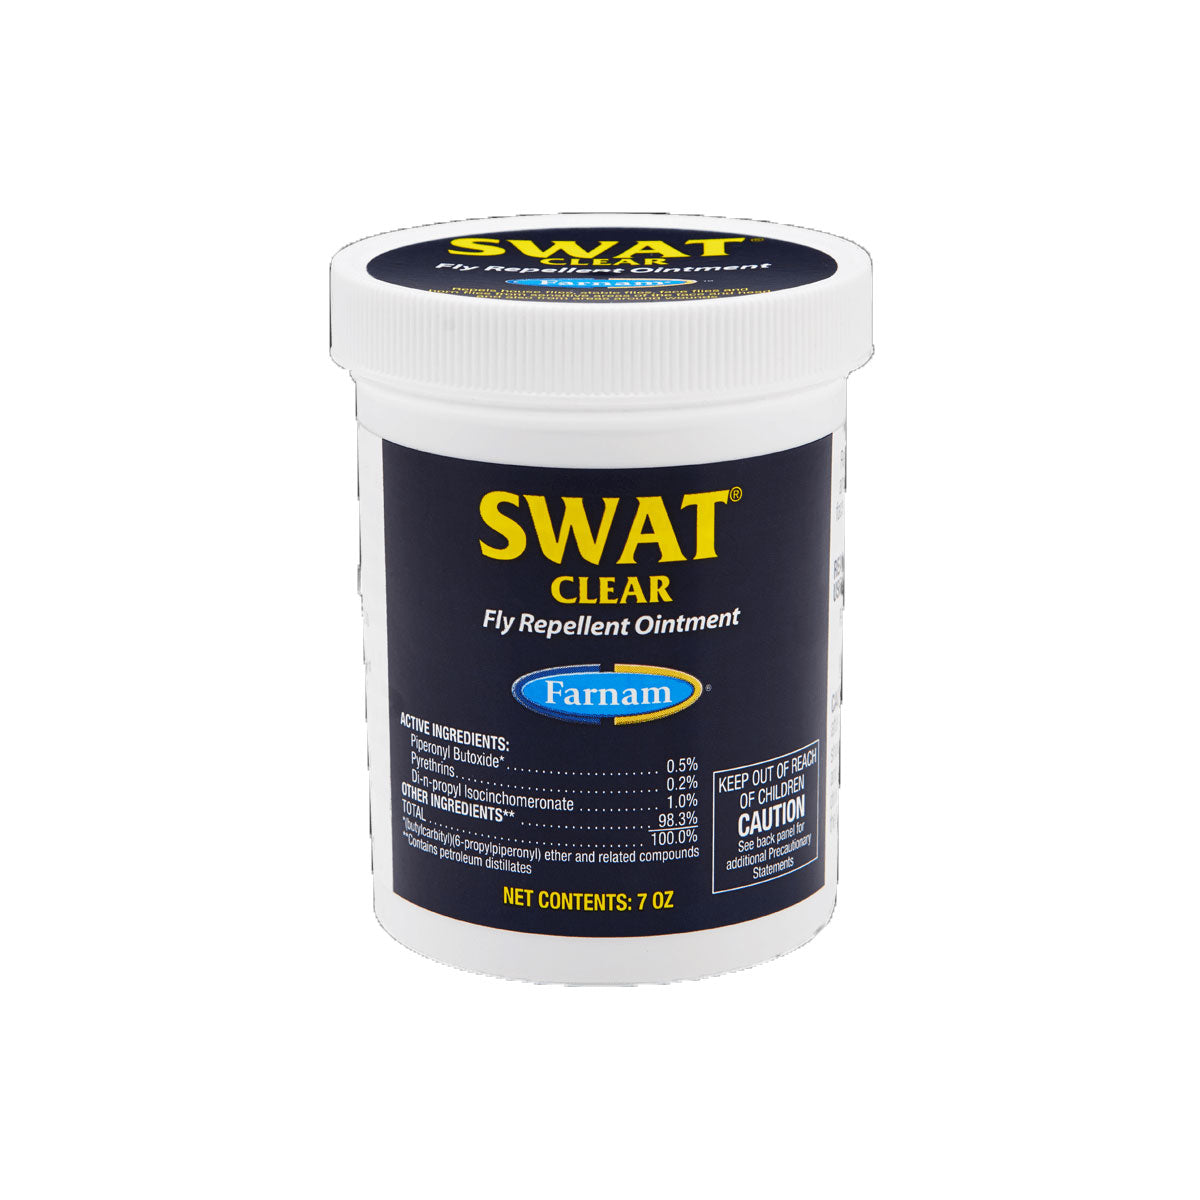 SWAT Fly Repellent Ointment for Horses 7 oz